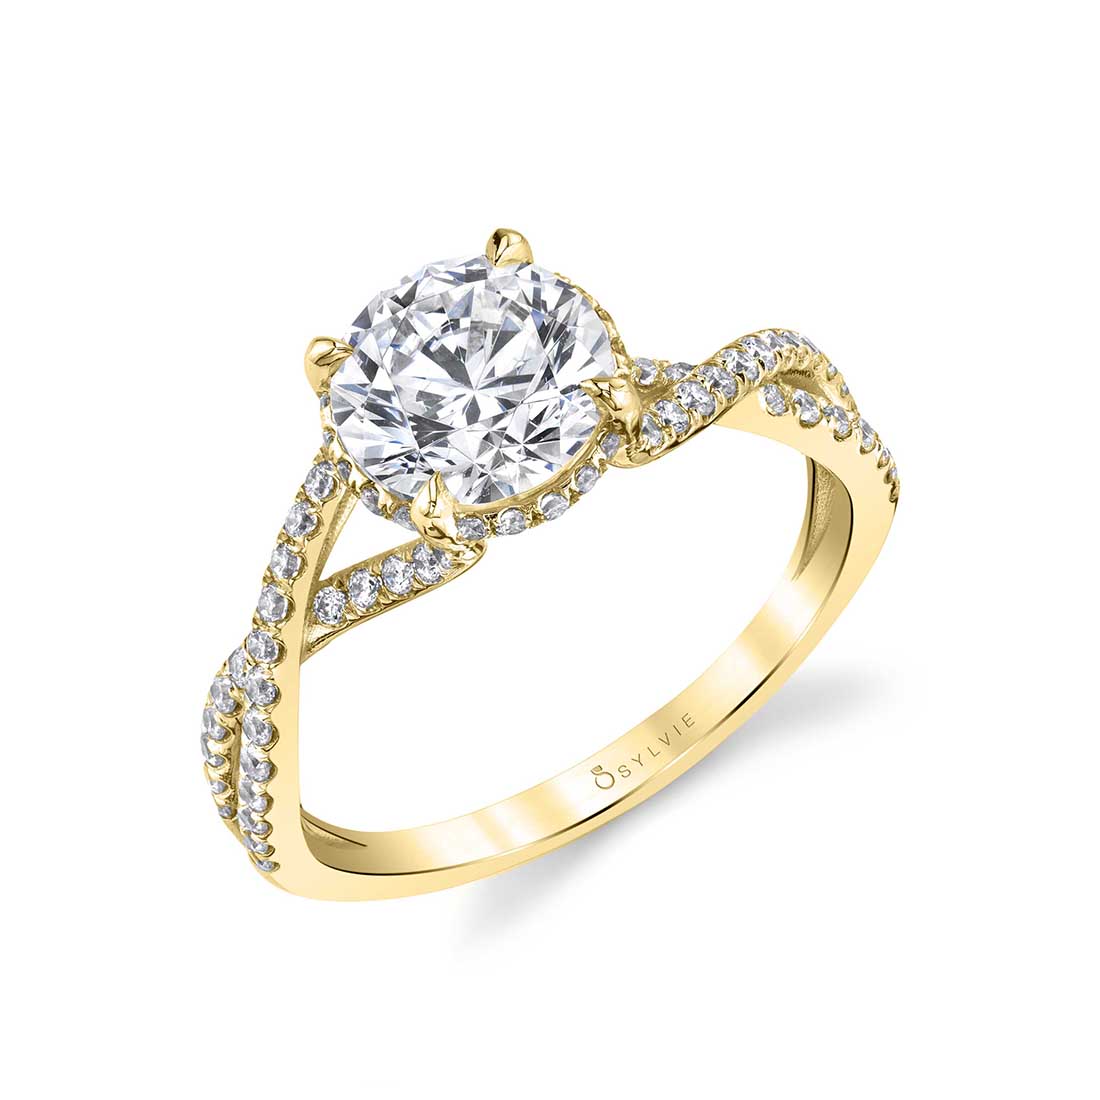 Twisted Engagement Ring with a hidden halo shown in yellow gold - Agnia Ring